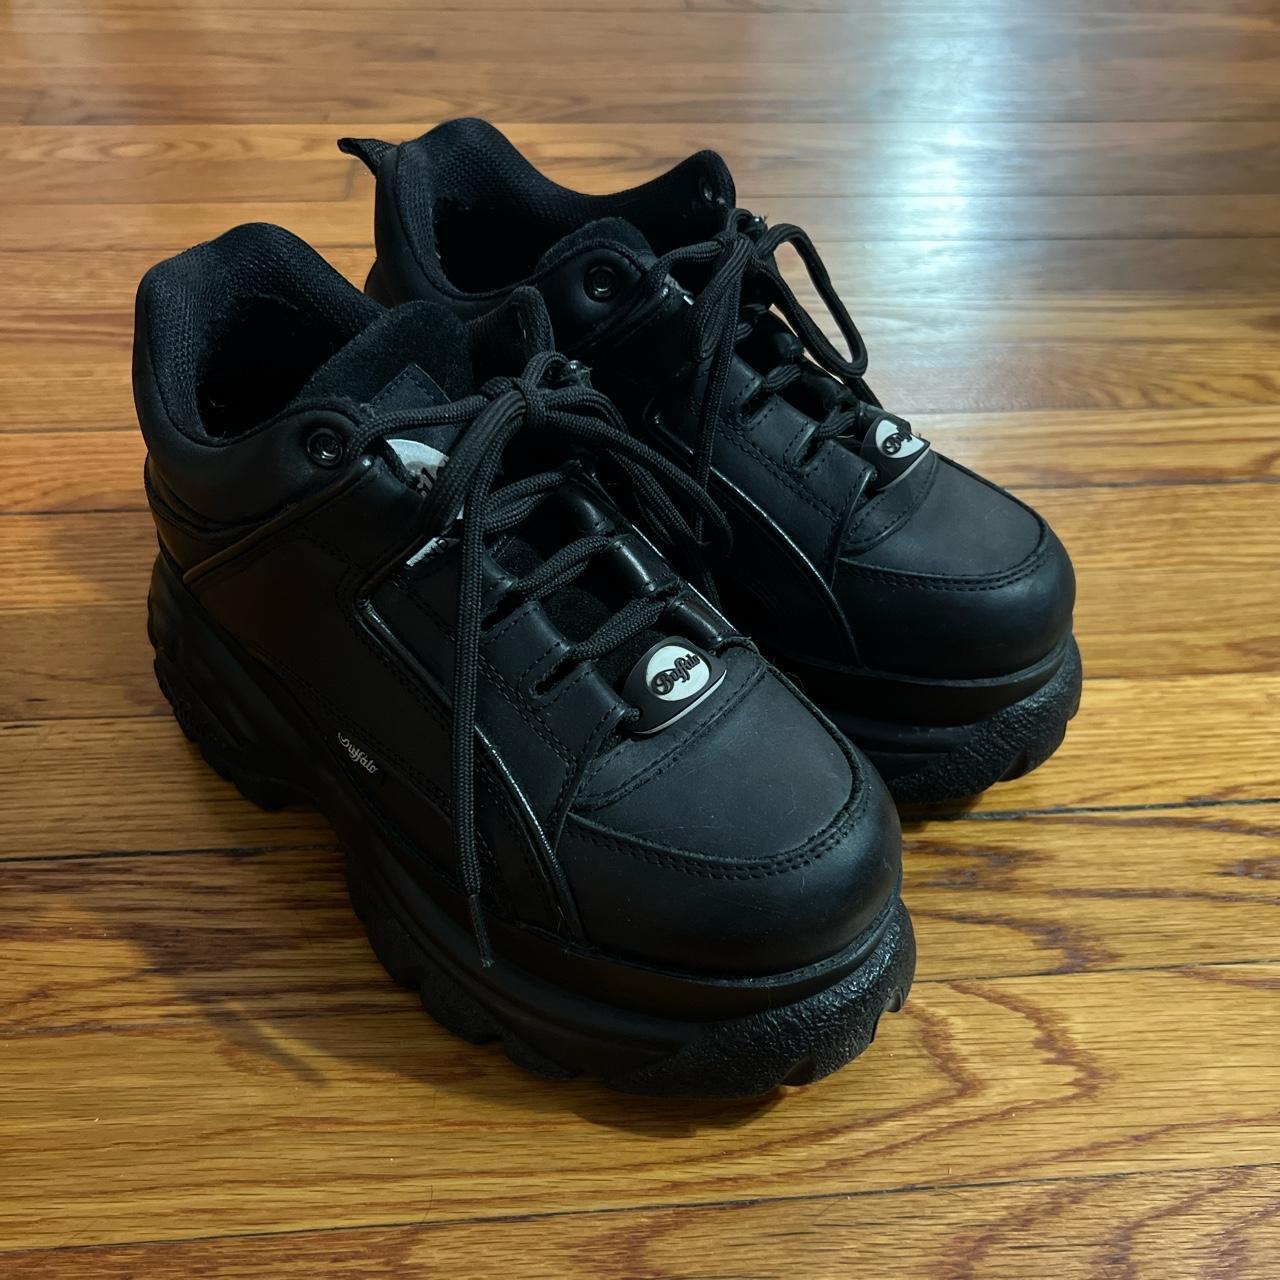 sneakers size (equivalent to 6.5) in... Depop